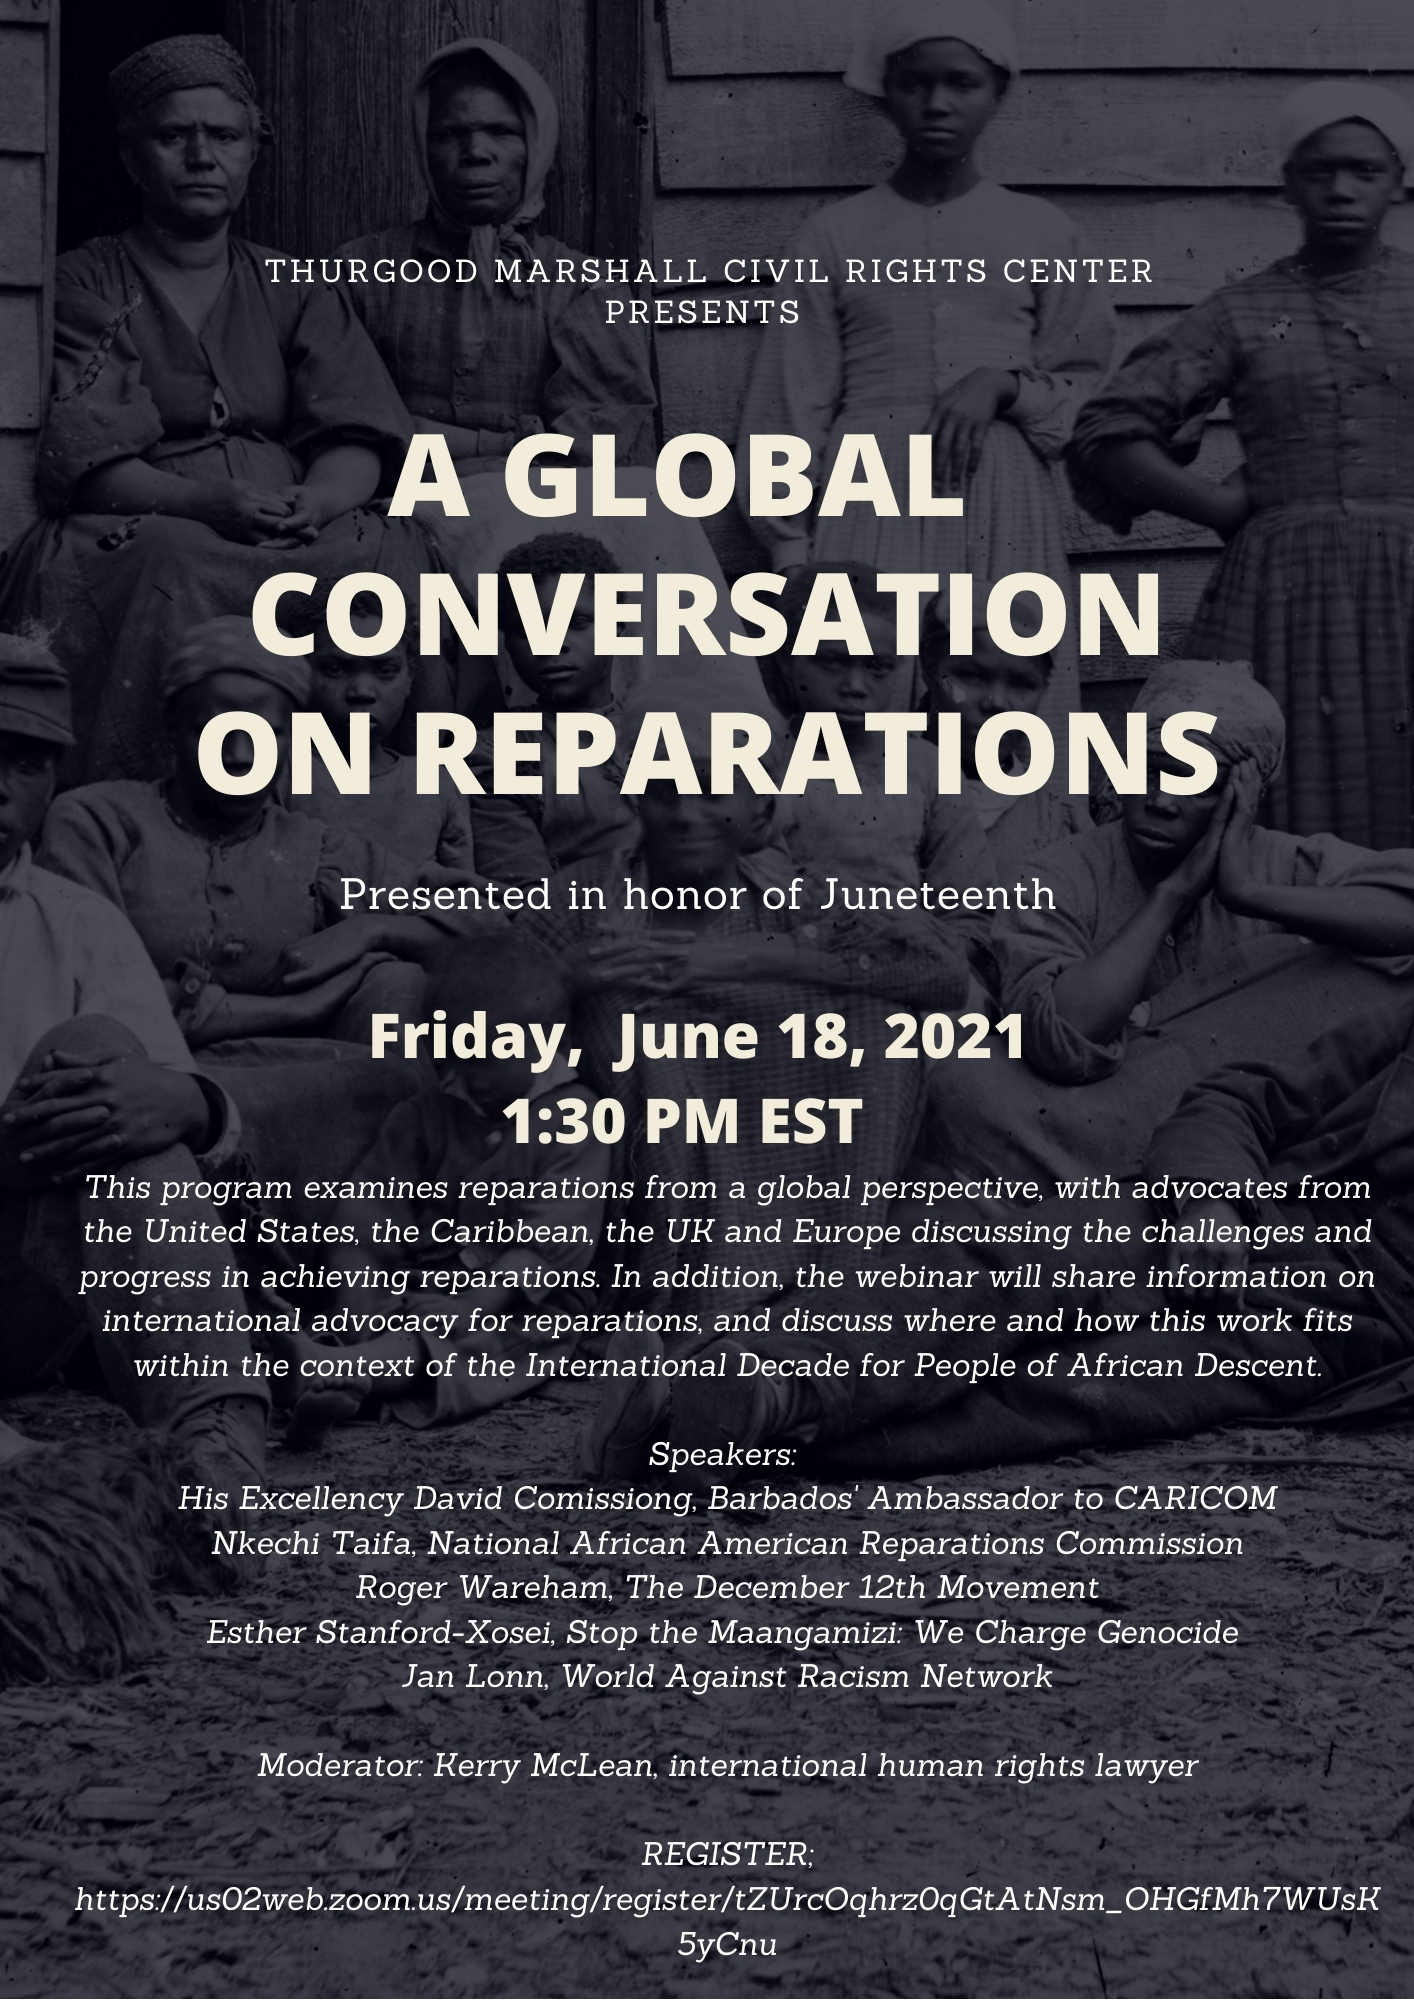 A Global Conversation on Reparations